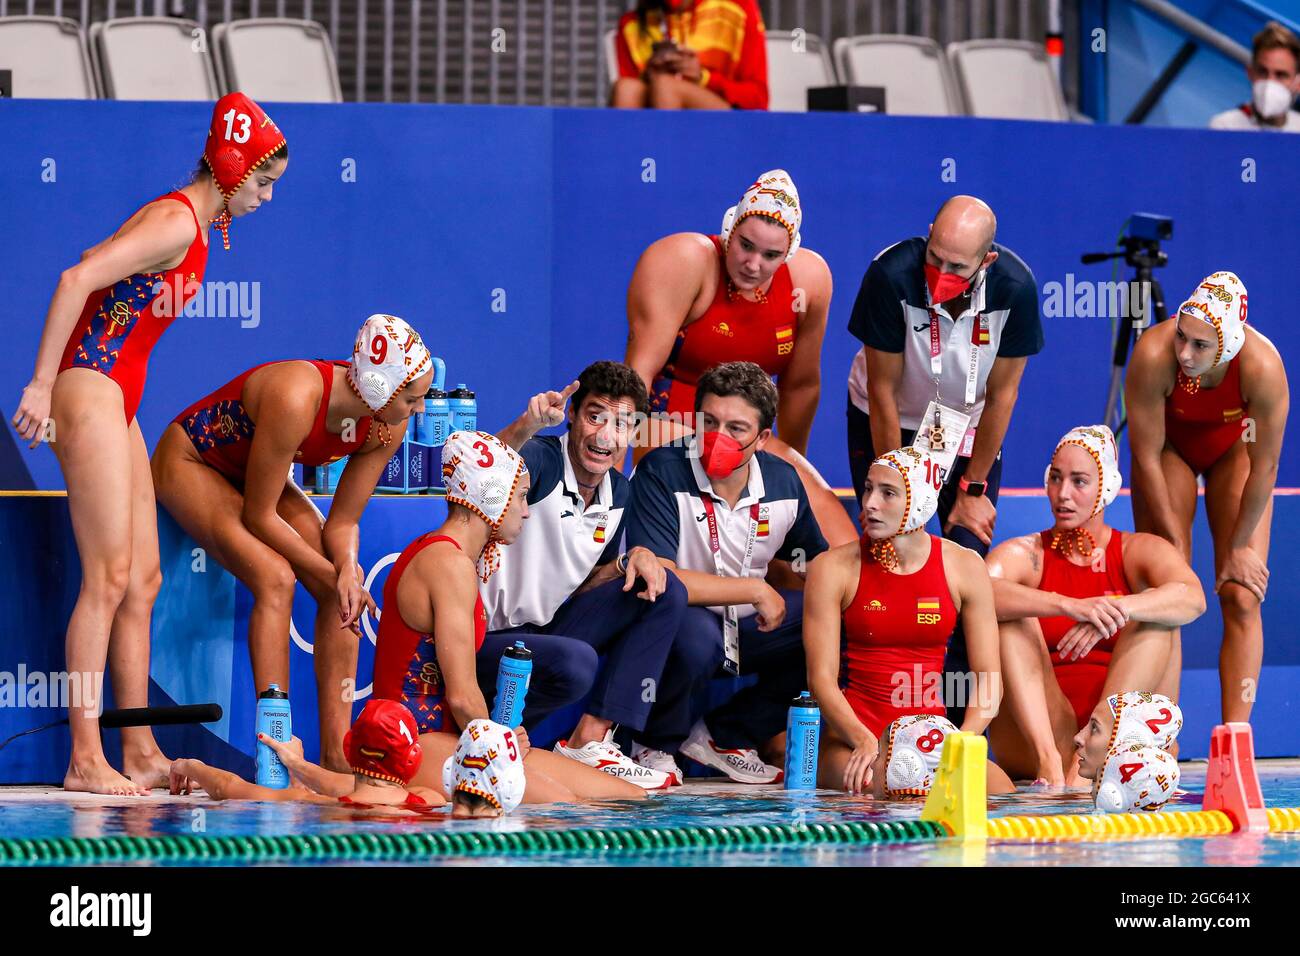 Tokyo, Japan. 07th Aug, 2021. TOKYO, JAPAN - AUGUST 7: head coach Miki Oca of Spain, assistant coach Jordi Valls Nart of Spain, assistant coach Angel Luis Andreo Gaban of Spain, Elena Sanchez of Spain, Paula Leiton of Spain, Maica Garcia of Spain, Roser Tarrago of Spain, Judith Forca of Spain, Irene Gonzalez of Spain, Elena Ruiz of Spain, Bea Ortiz of Spain, Anni Espar of Spain, Marta Bach of Spain, Laura Ester of Spain, Maria Del Pilar Pena of Spain during the Tokyo 2020 Olympic Waterpolo Tournament Women's Gold Medal match between Spain and United States at Tatsumi Waterpolo Centre on August Stock Photo